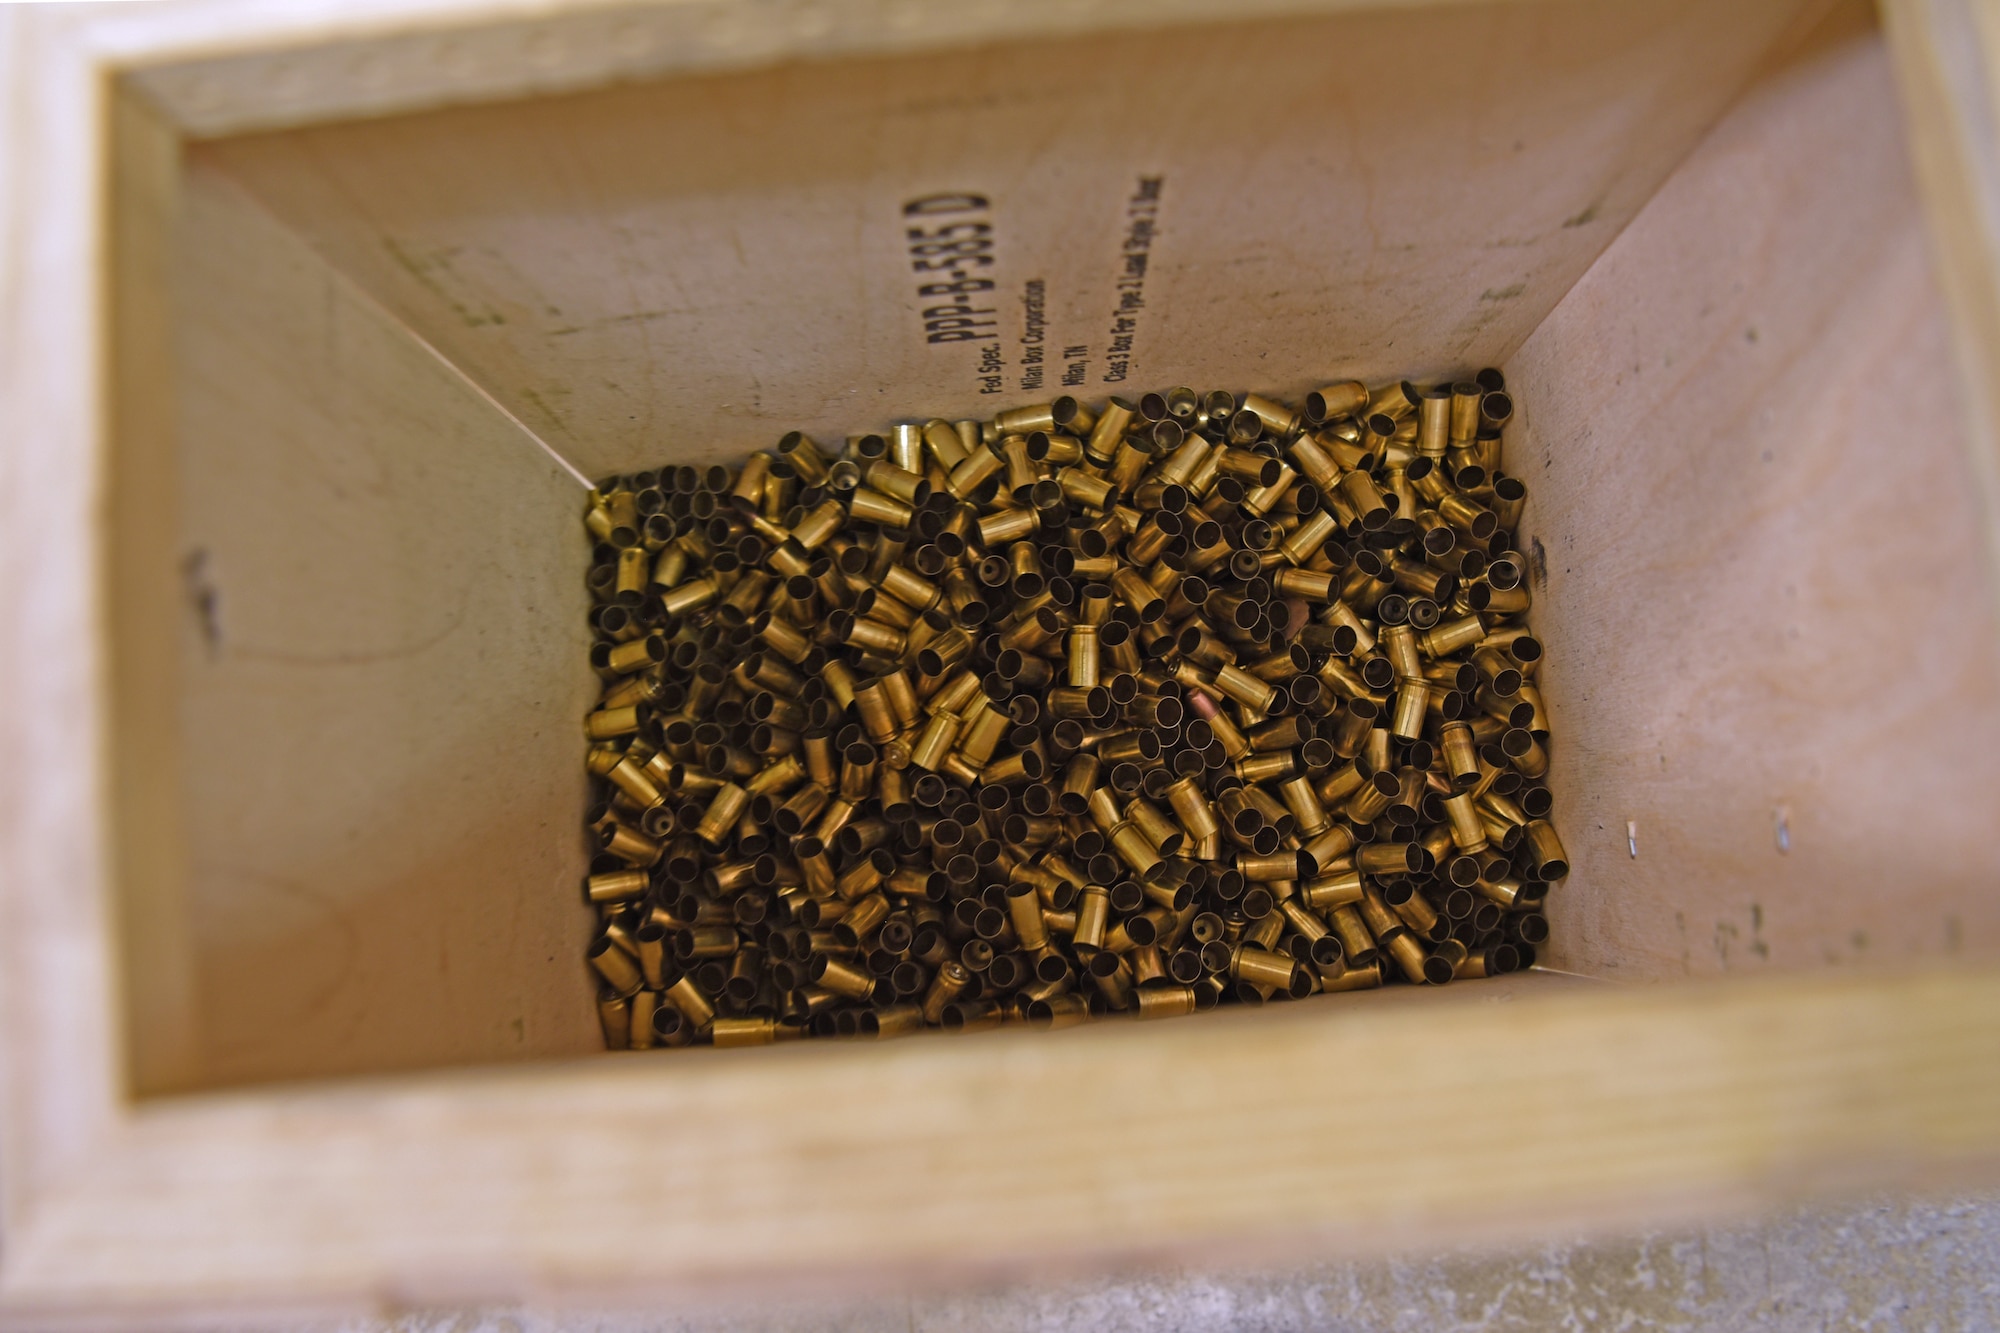 Used bullet casings are disposed of in a bin during the Shooting in Excellence competition at the firing range, on Goodfellow Air Force Base, Texas, March 30, 2021. Each competitor fired 30 rounds throughout variously timed intervals and utilized different firing techniques at the competition. (U.S. Air Force photo by Senior Airman Abbey Rieves)